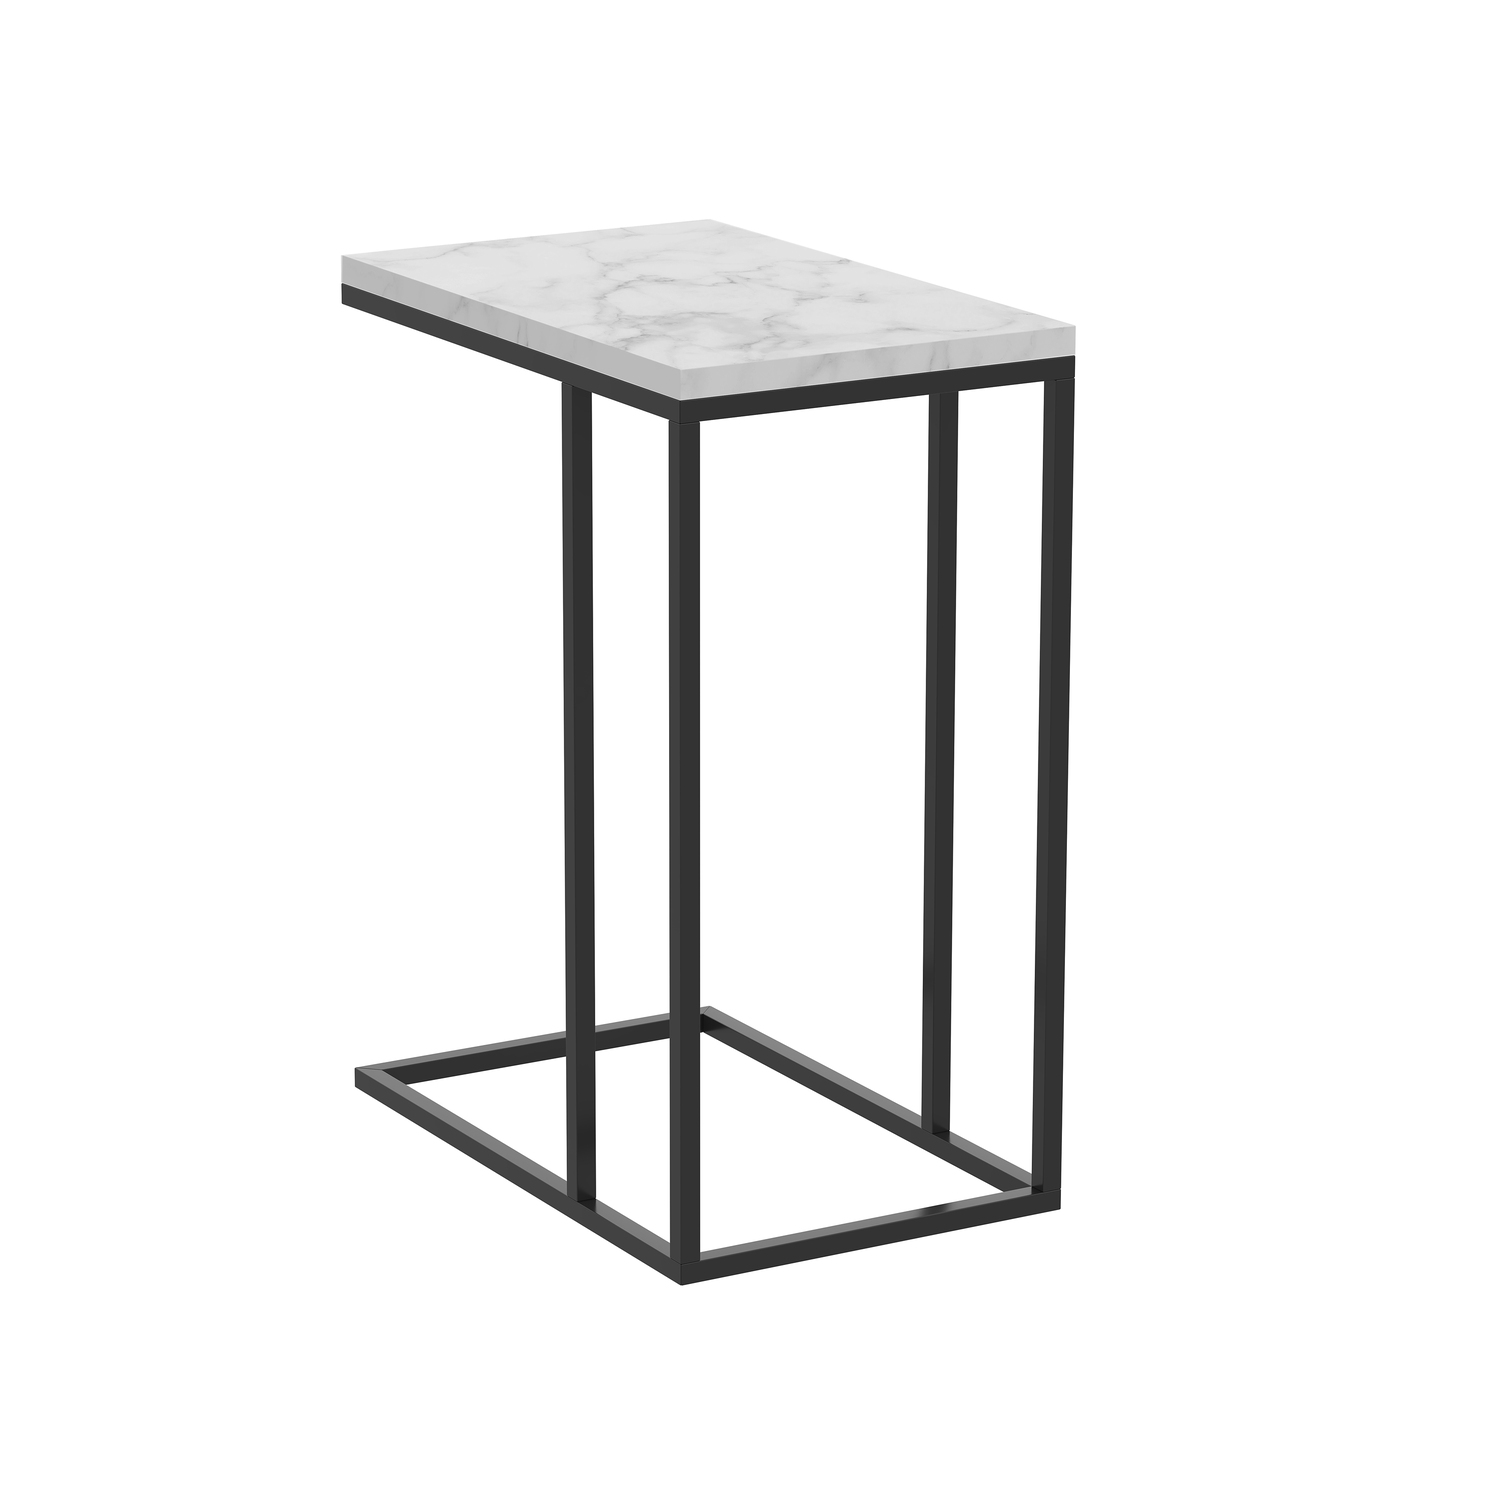 Safdie &amp; Co. 19"L C-Shape Marble Accent Table in Black Metal - image 1 of 4